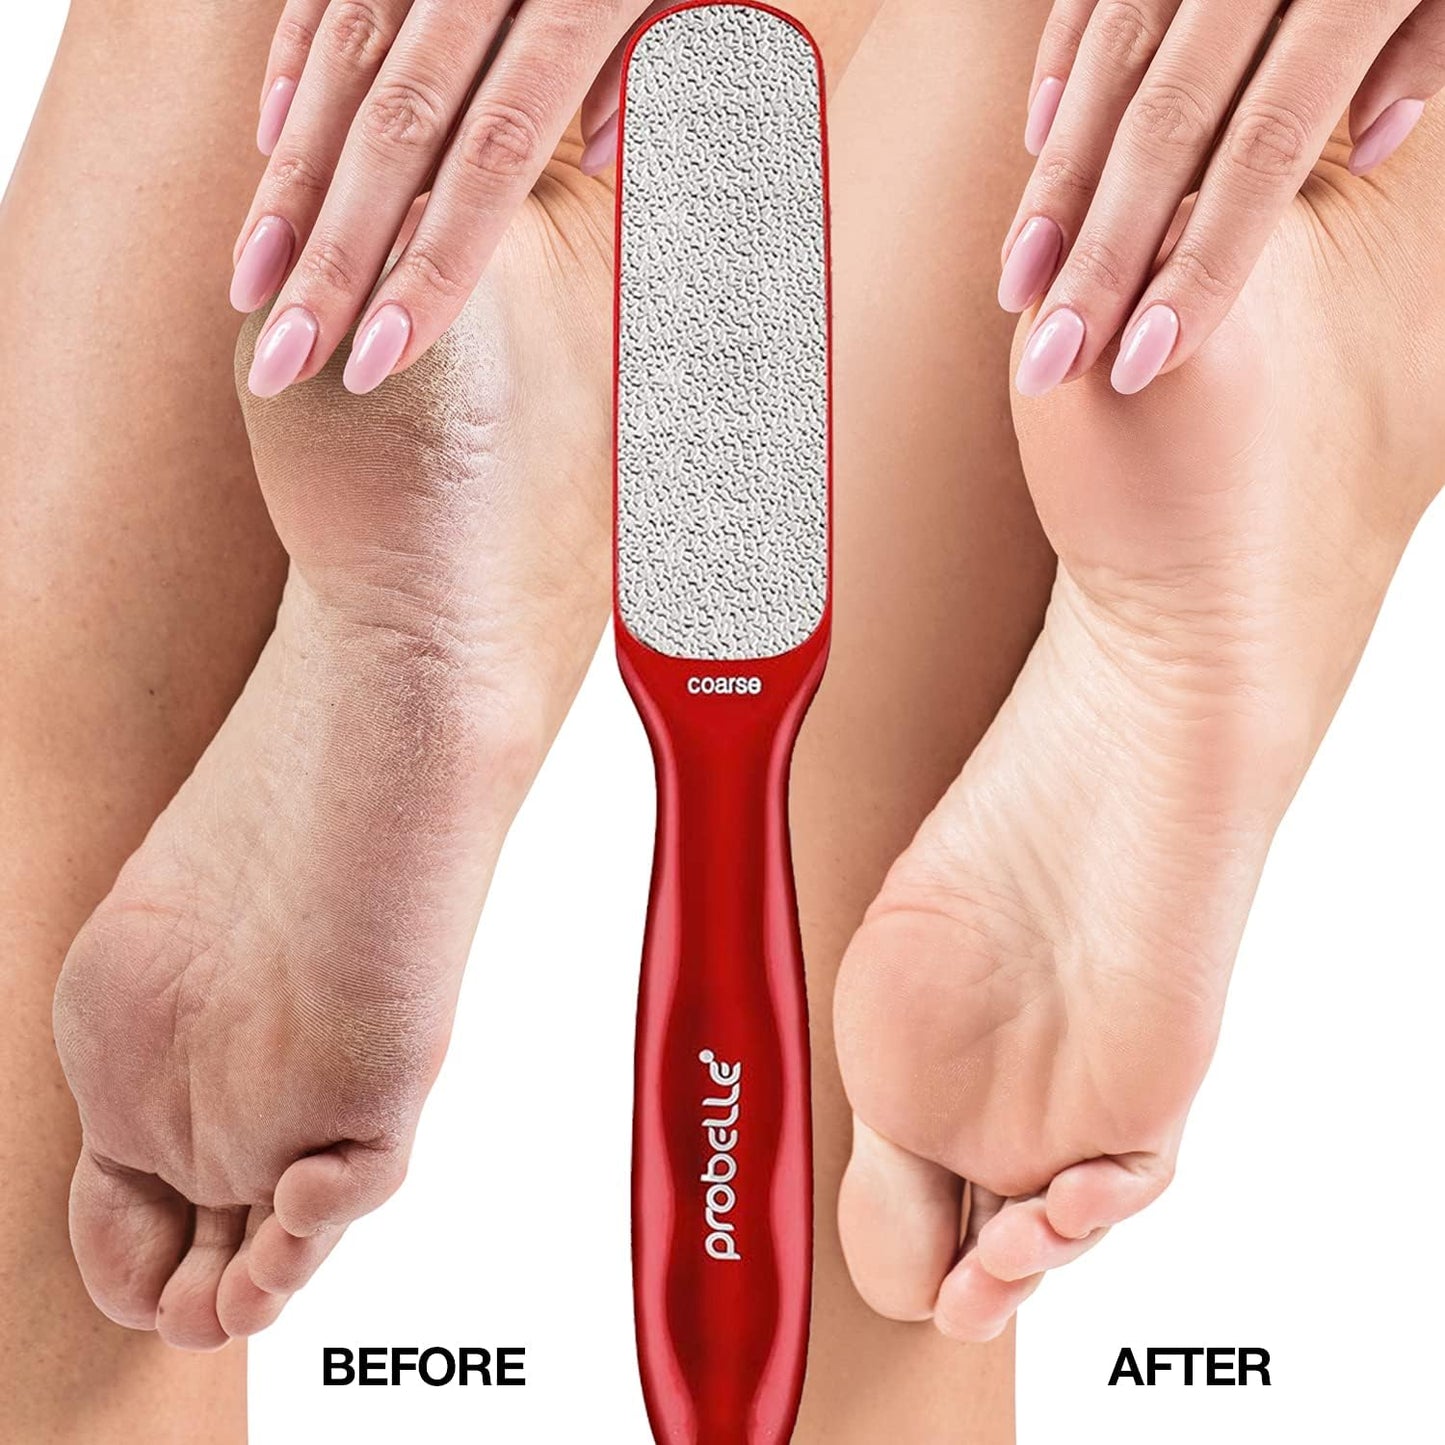 Double Sided Multidirectional Nickel Foot File Callus Remover - Immediately Reduces Calluses and Corns to Powder for Instant Results, Safe Tool (Red)